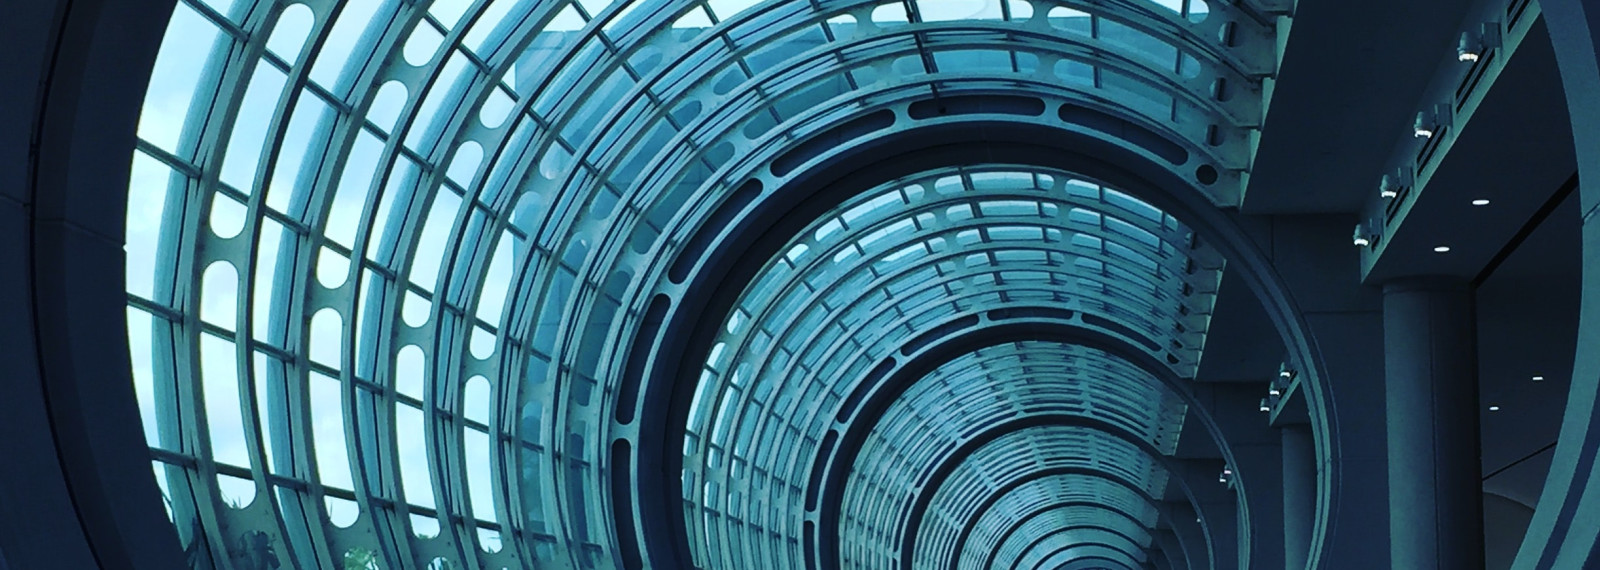 Looking down a circular glass tunnel towards a corporate looking building